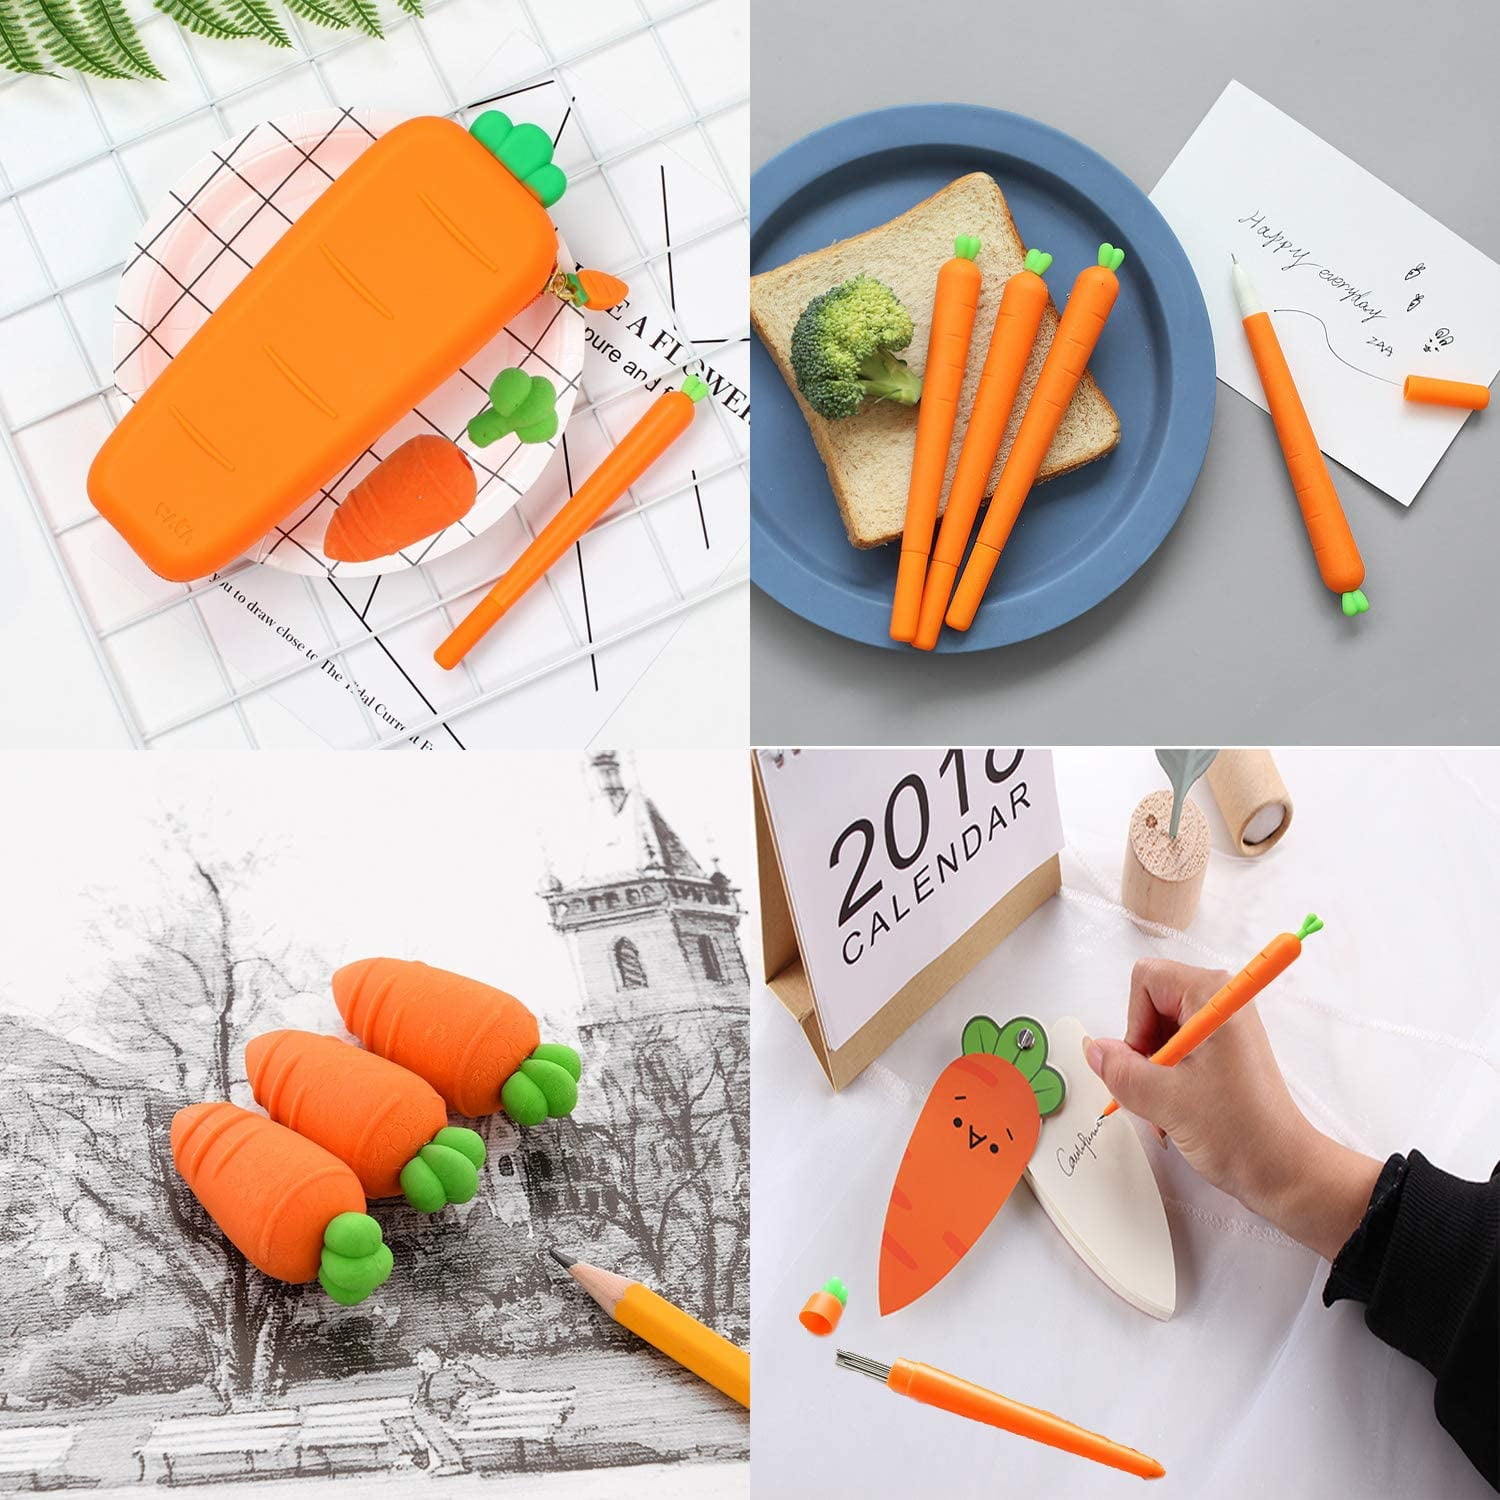 Cute Carrot Pencil Case Set - Pack of 10pcs,Large Capacity Soft Silicone Carrot  Pen Pouch,Gel Ink Pen,Mechanical Pencil,Eraser,Lead Refills for Cute School  Supplies/Stationery Kids Students Waterproof 